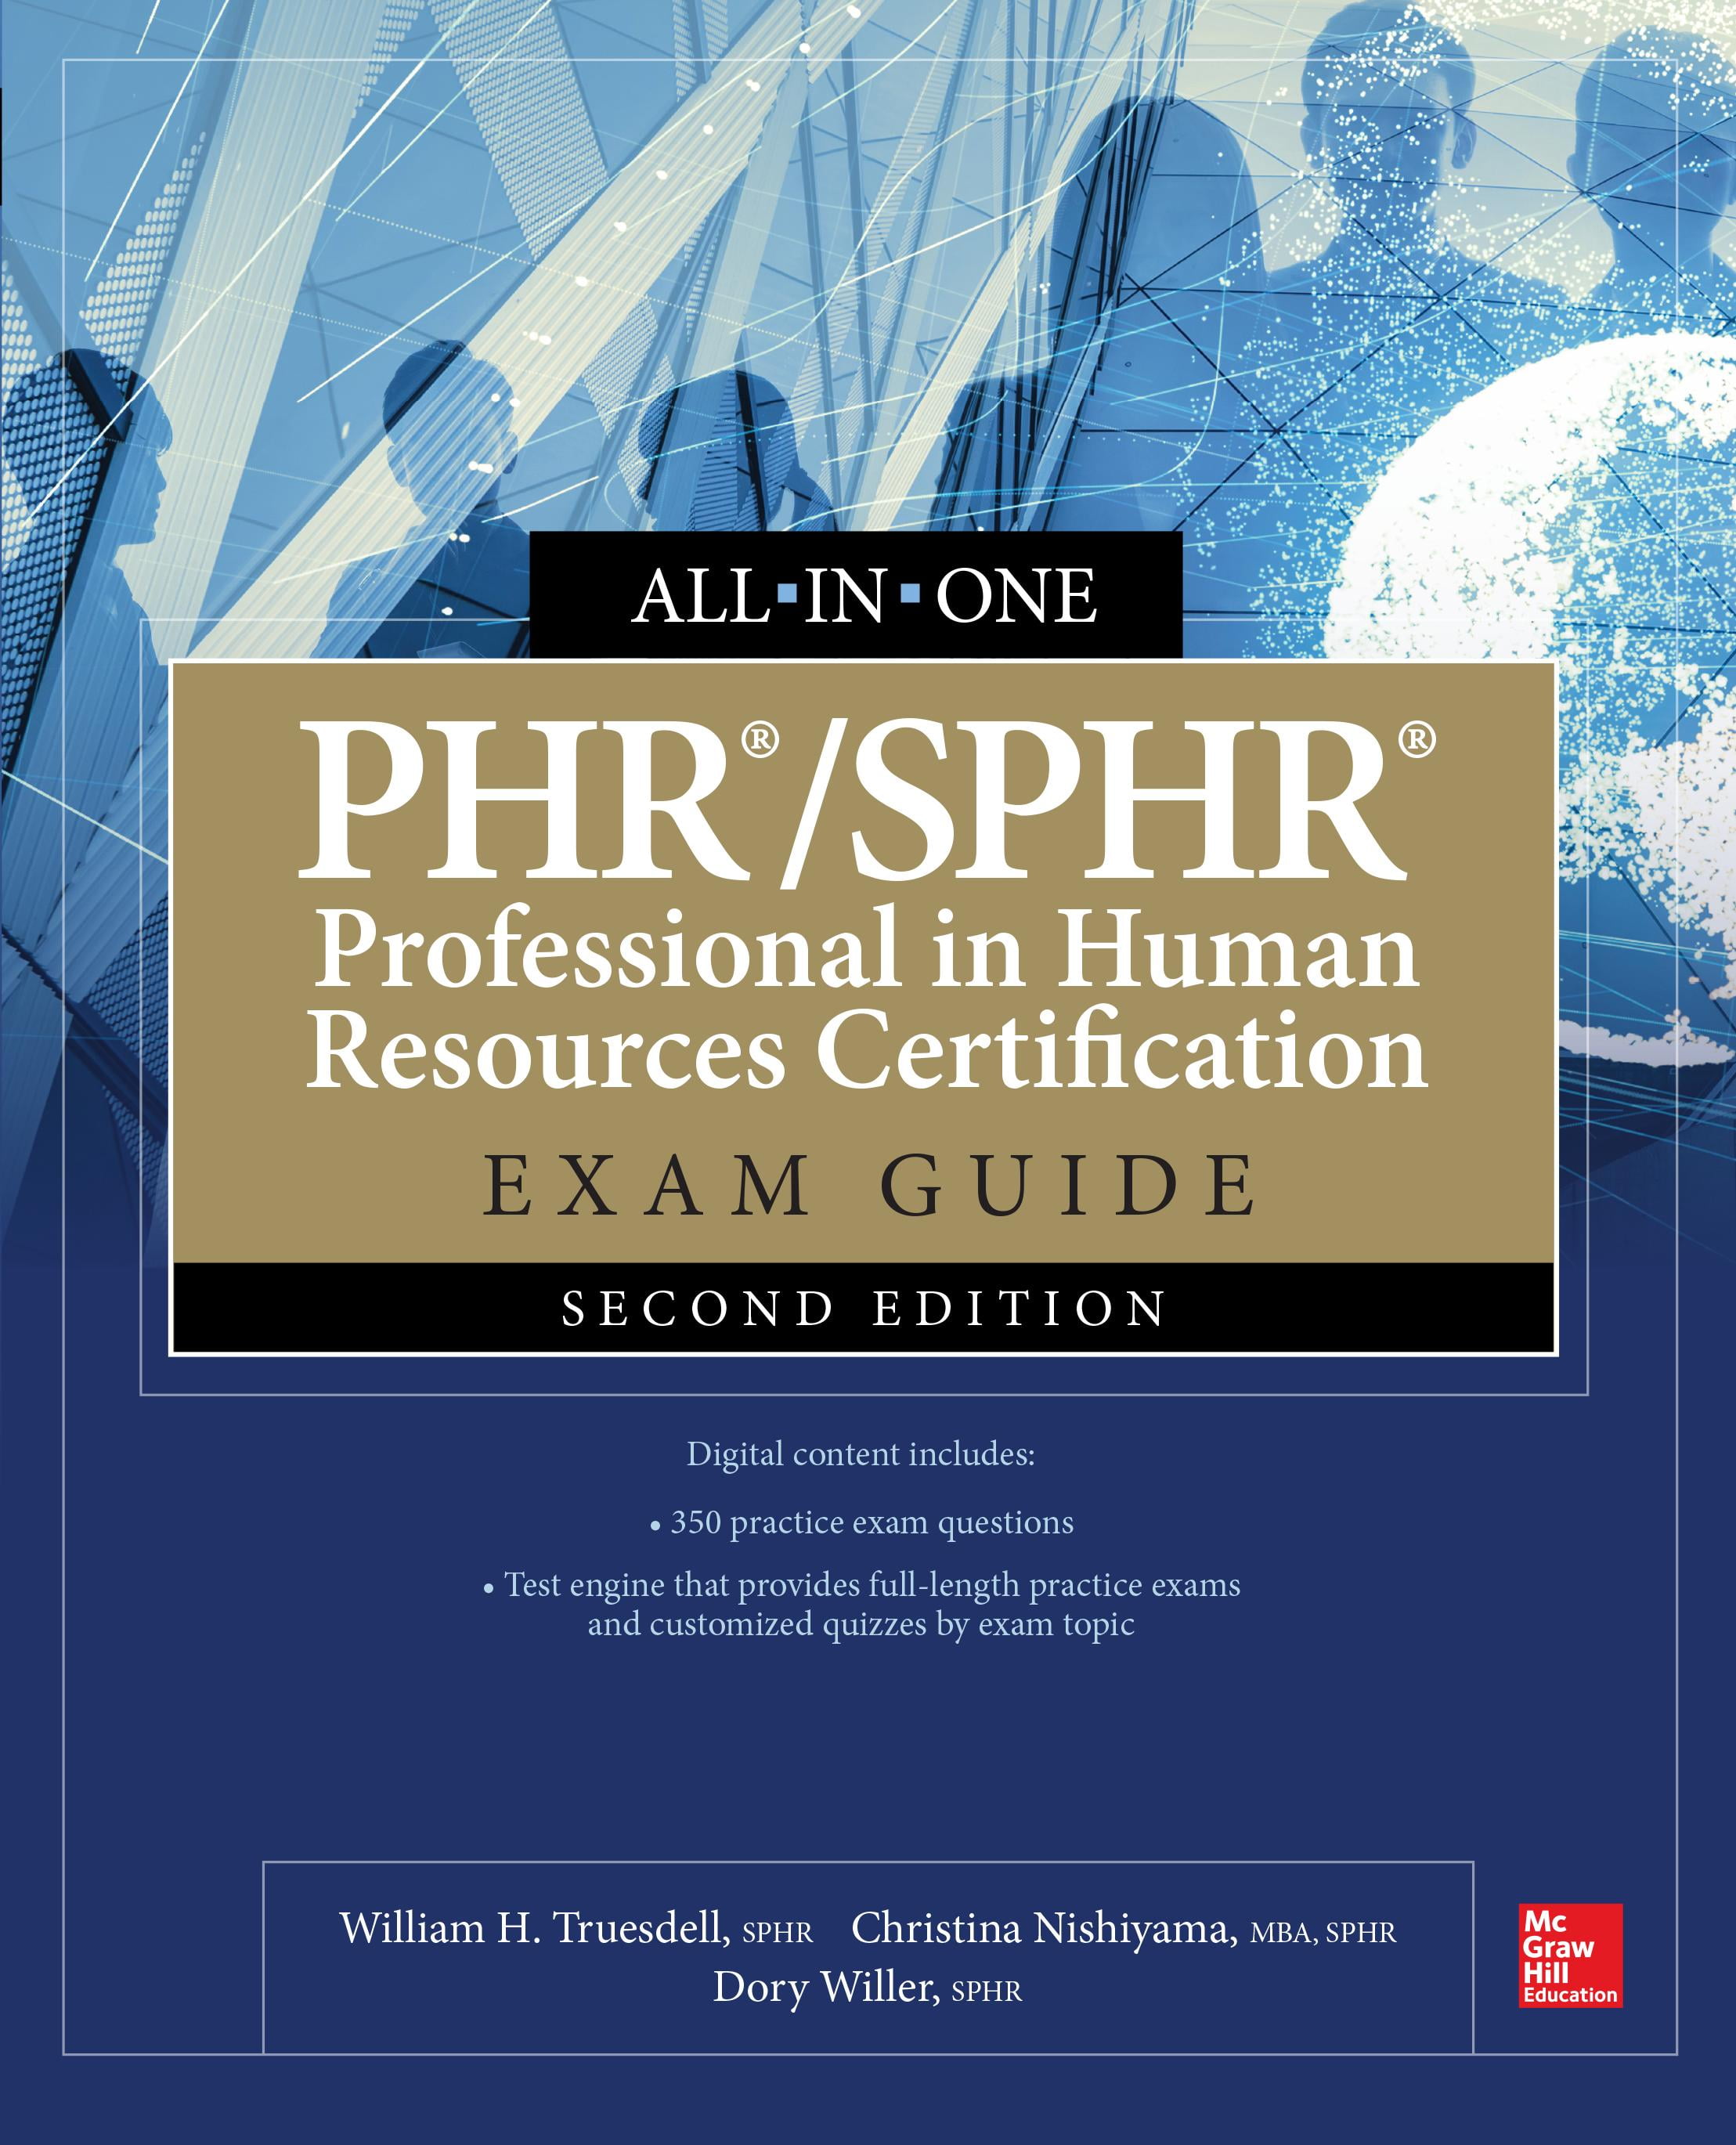 Phr/Sphr Professional in Human Resources Certification AllInOne Exam Guide, Second Edition